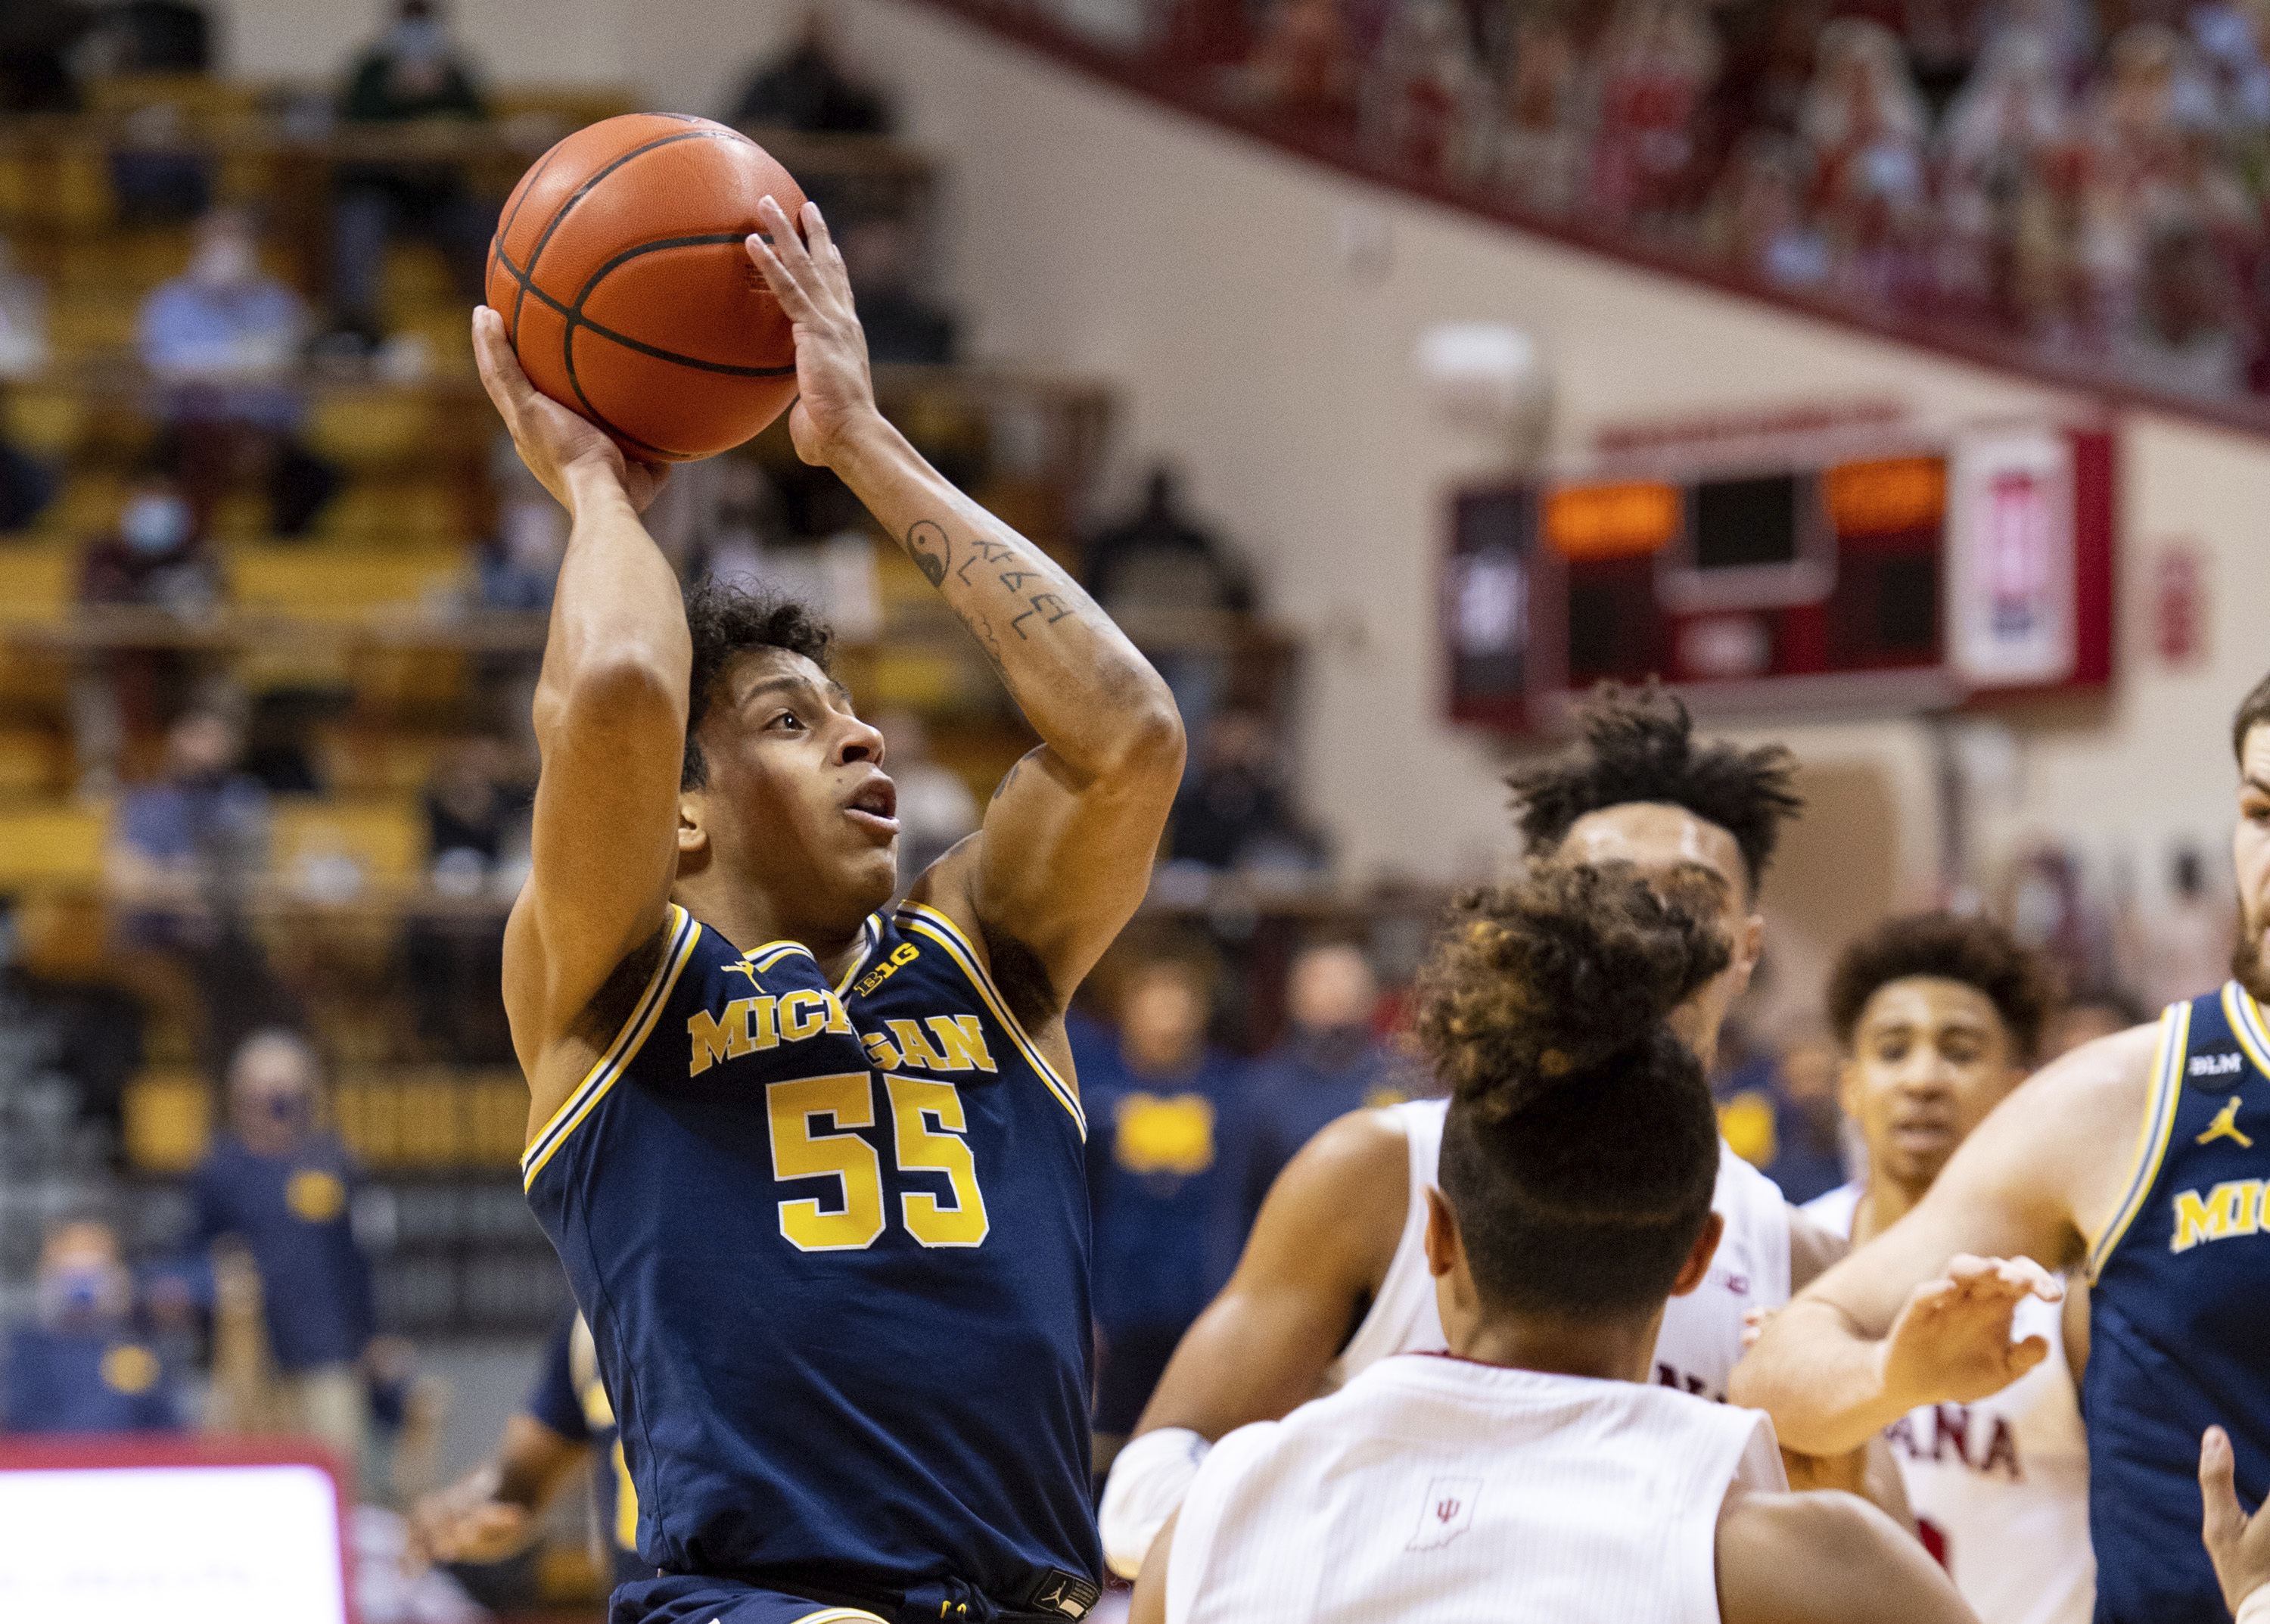 Michigan vs Illinois mens basketball free live stream, score updates, odds, time, TV channel, how to watch online (3/2/2021)